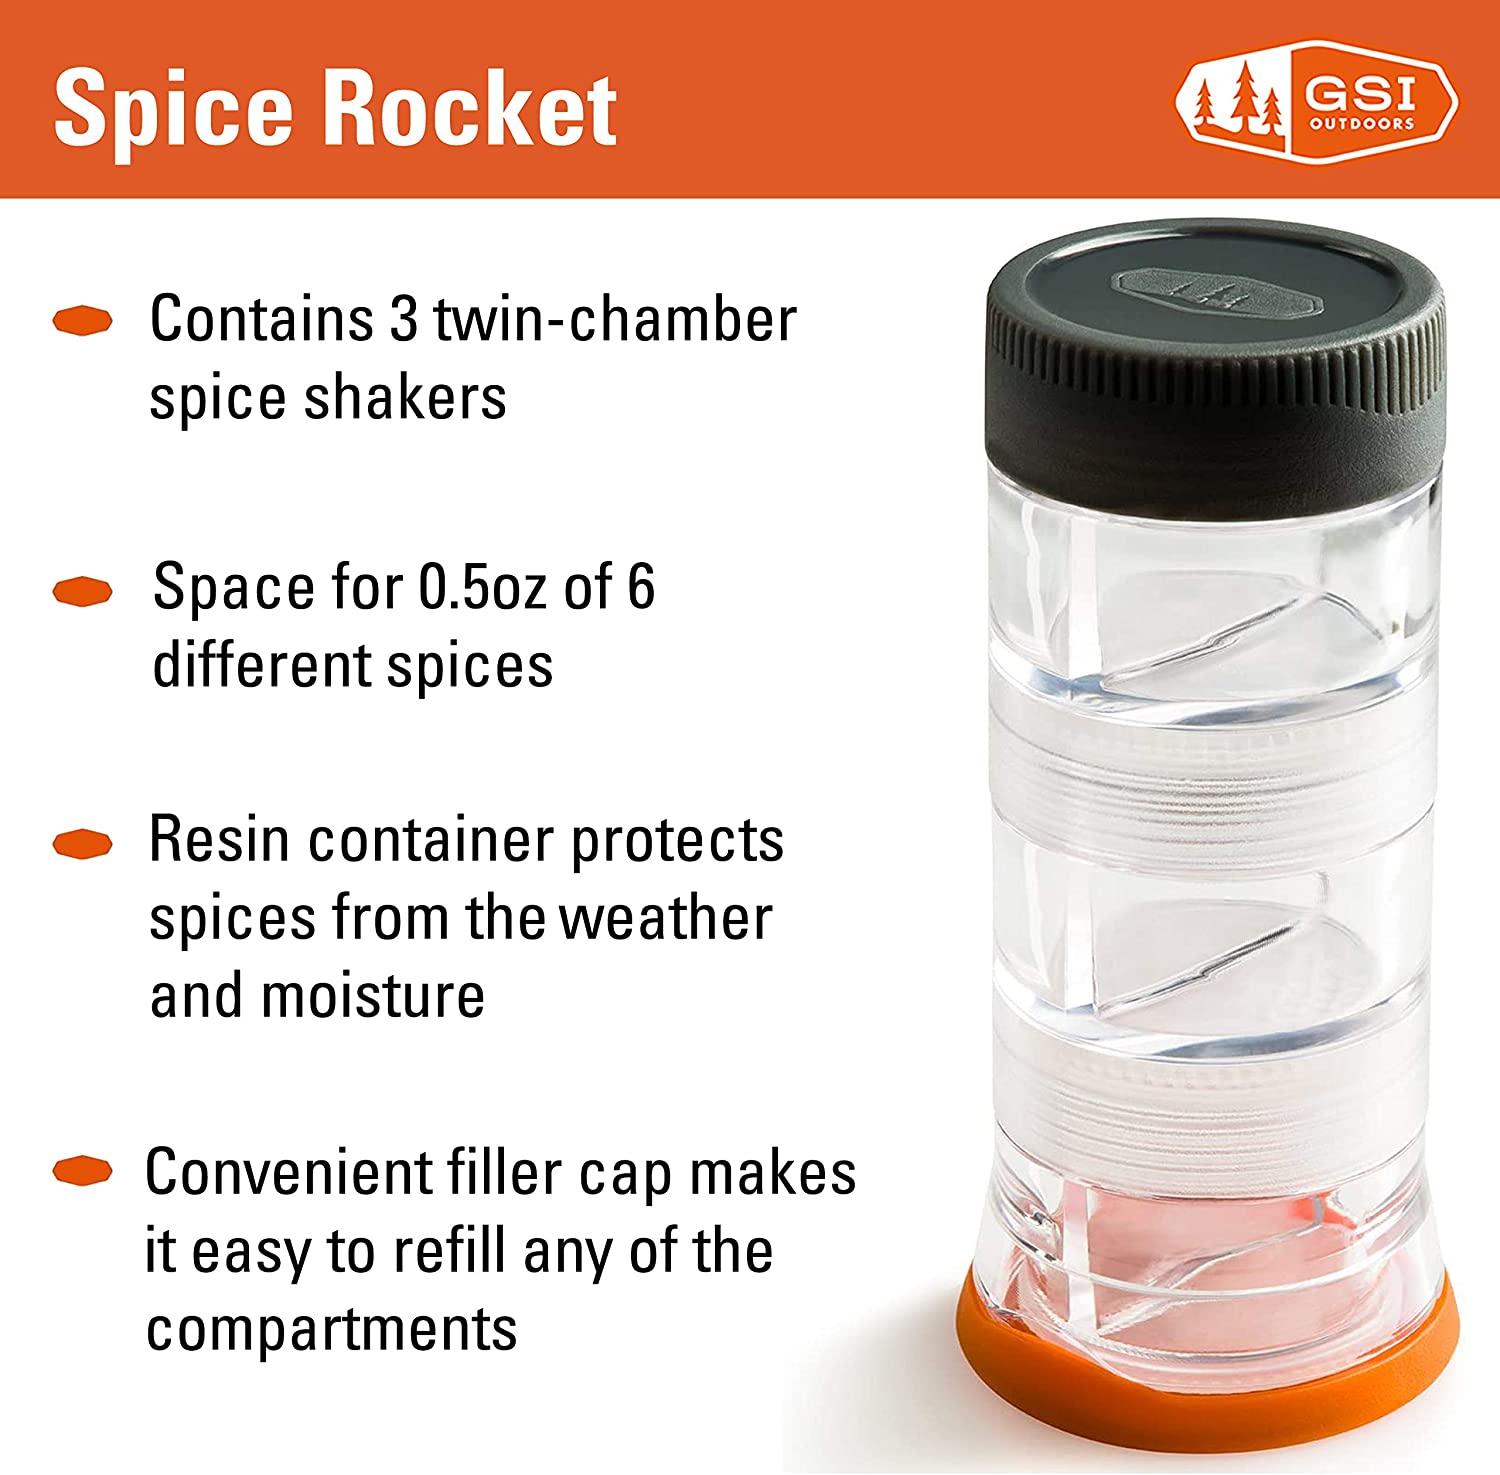 GSI Outdoors - Spice Rocket: Lightweight, Modular Spice Carrier for Travel,  Camping and Outdoors 0.5 fl. oz. x 6 Spice Rocket